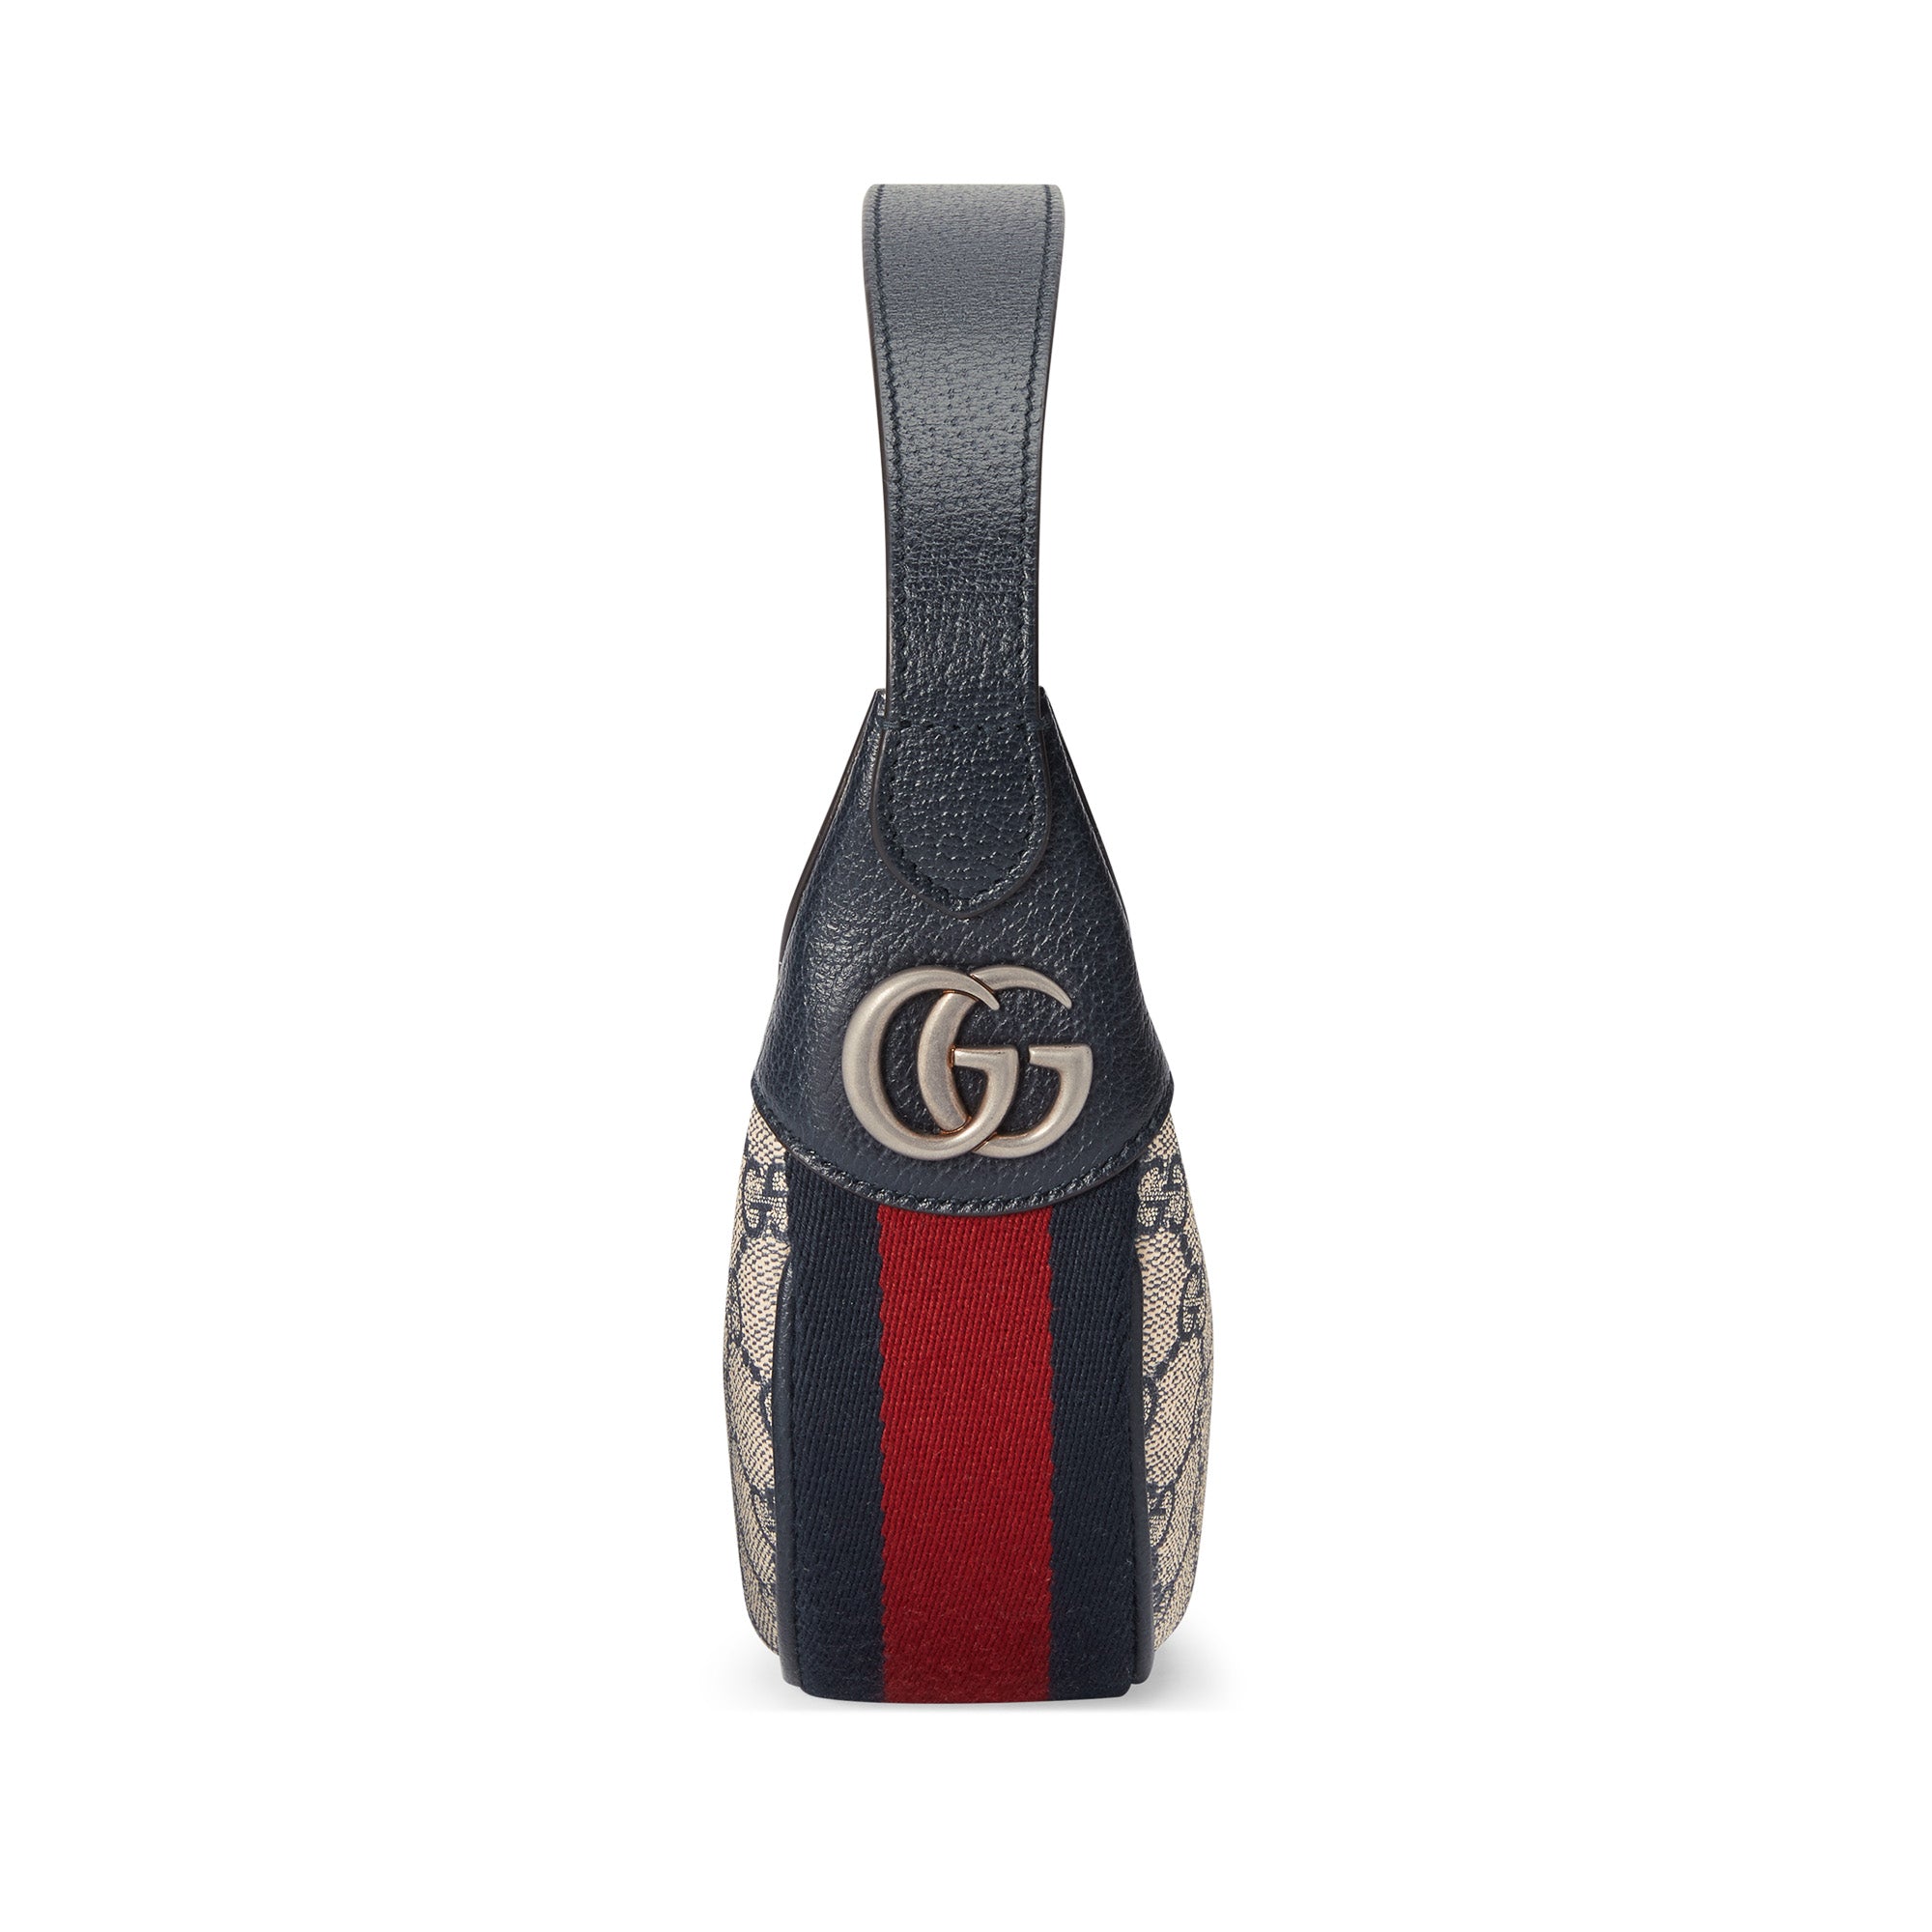 Gucci Ophidia recalls the vintage vibes in a glance ✨ Gucci GG